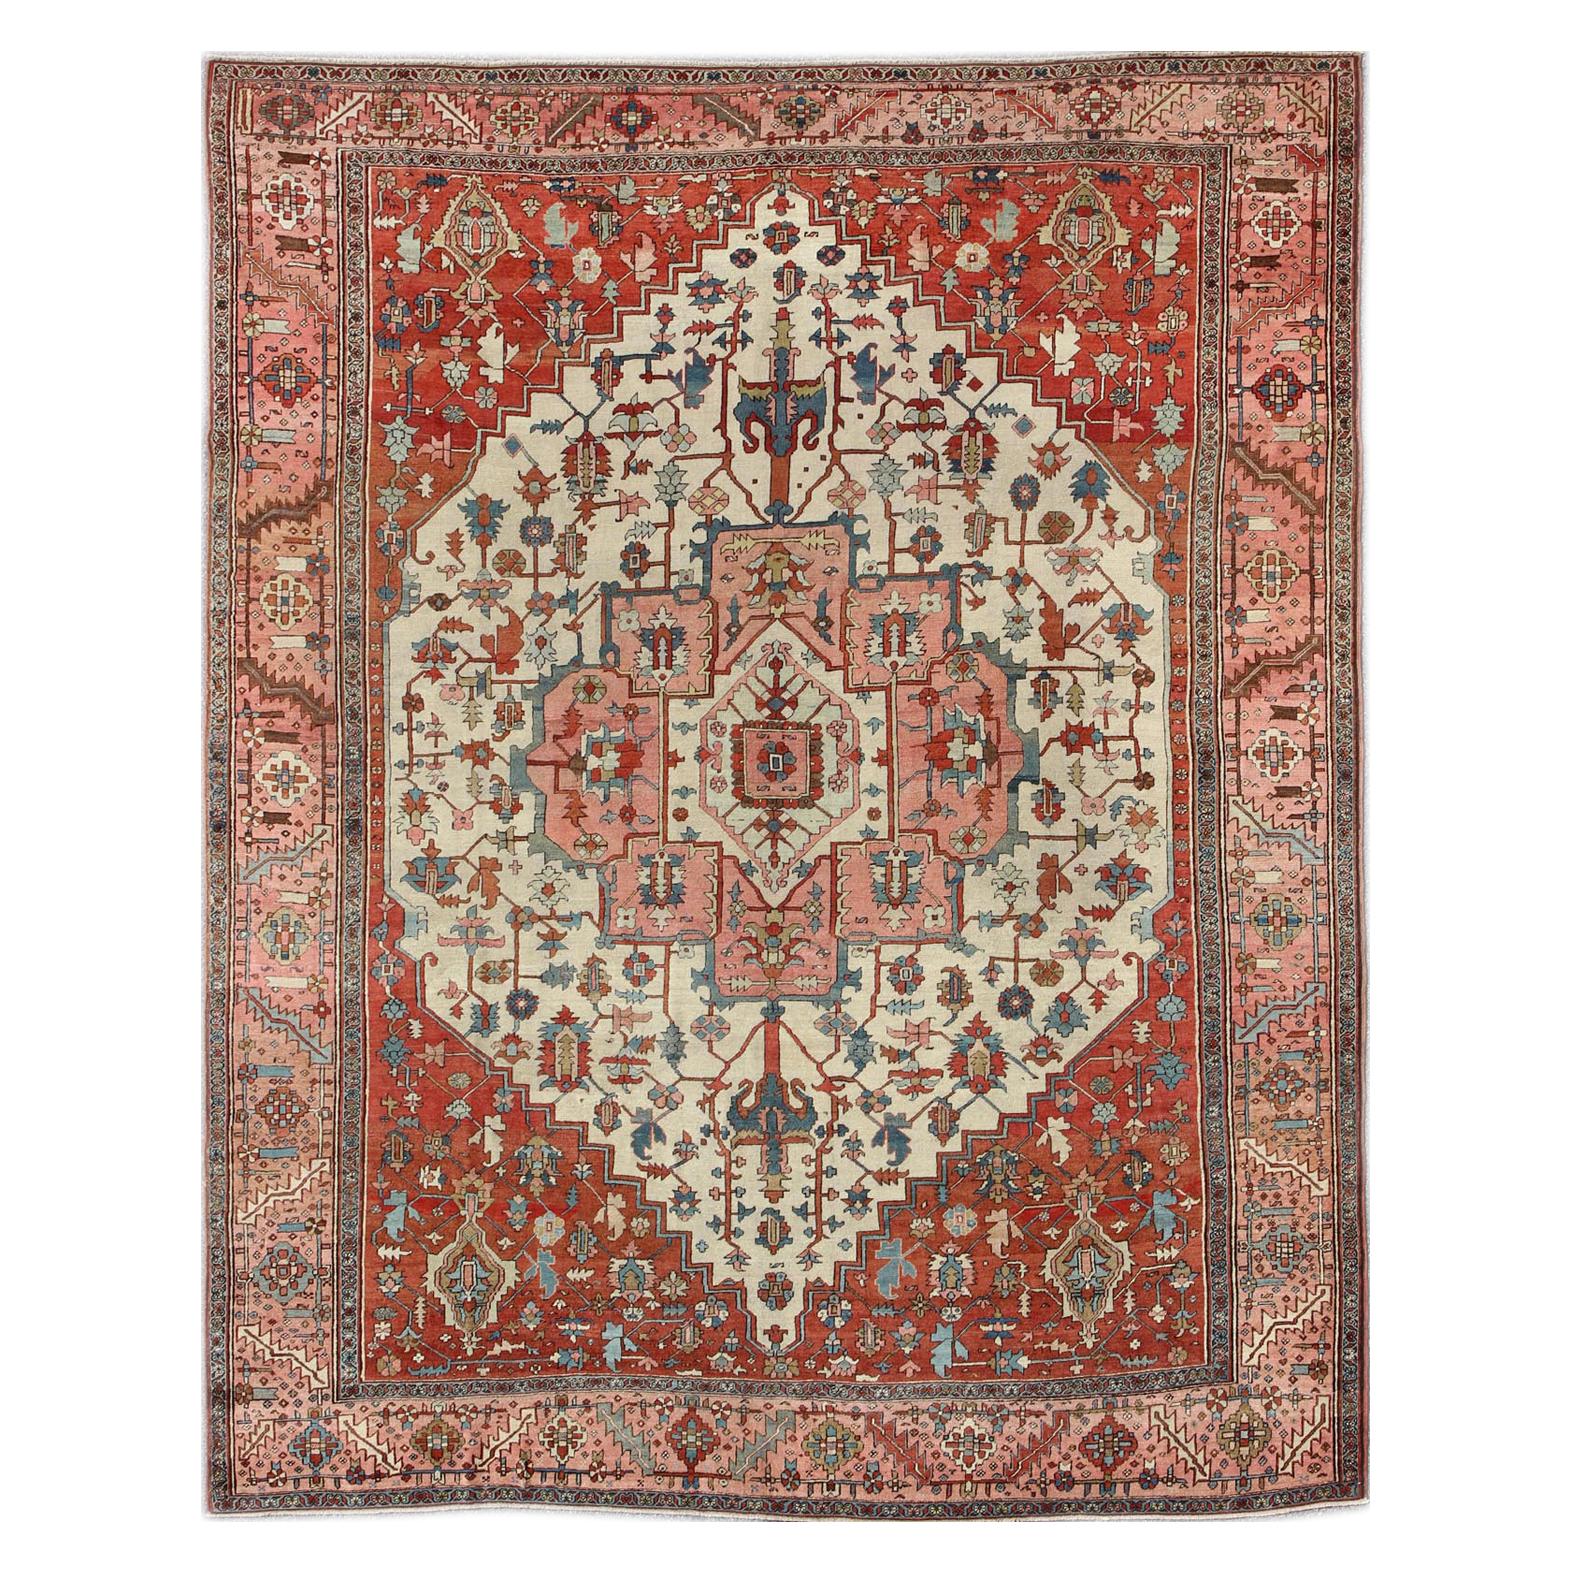 Antique Persian Serapi Rug in Squared Shape with  Ivory, Salmon, Brick Red